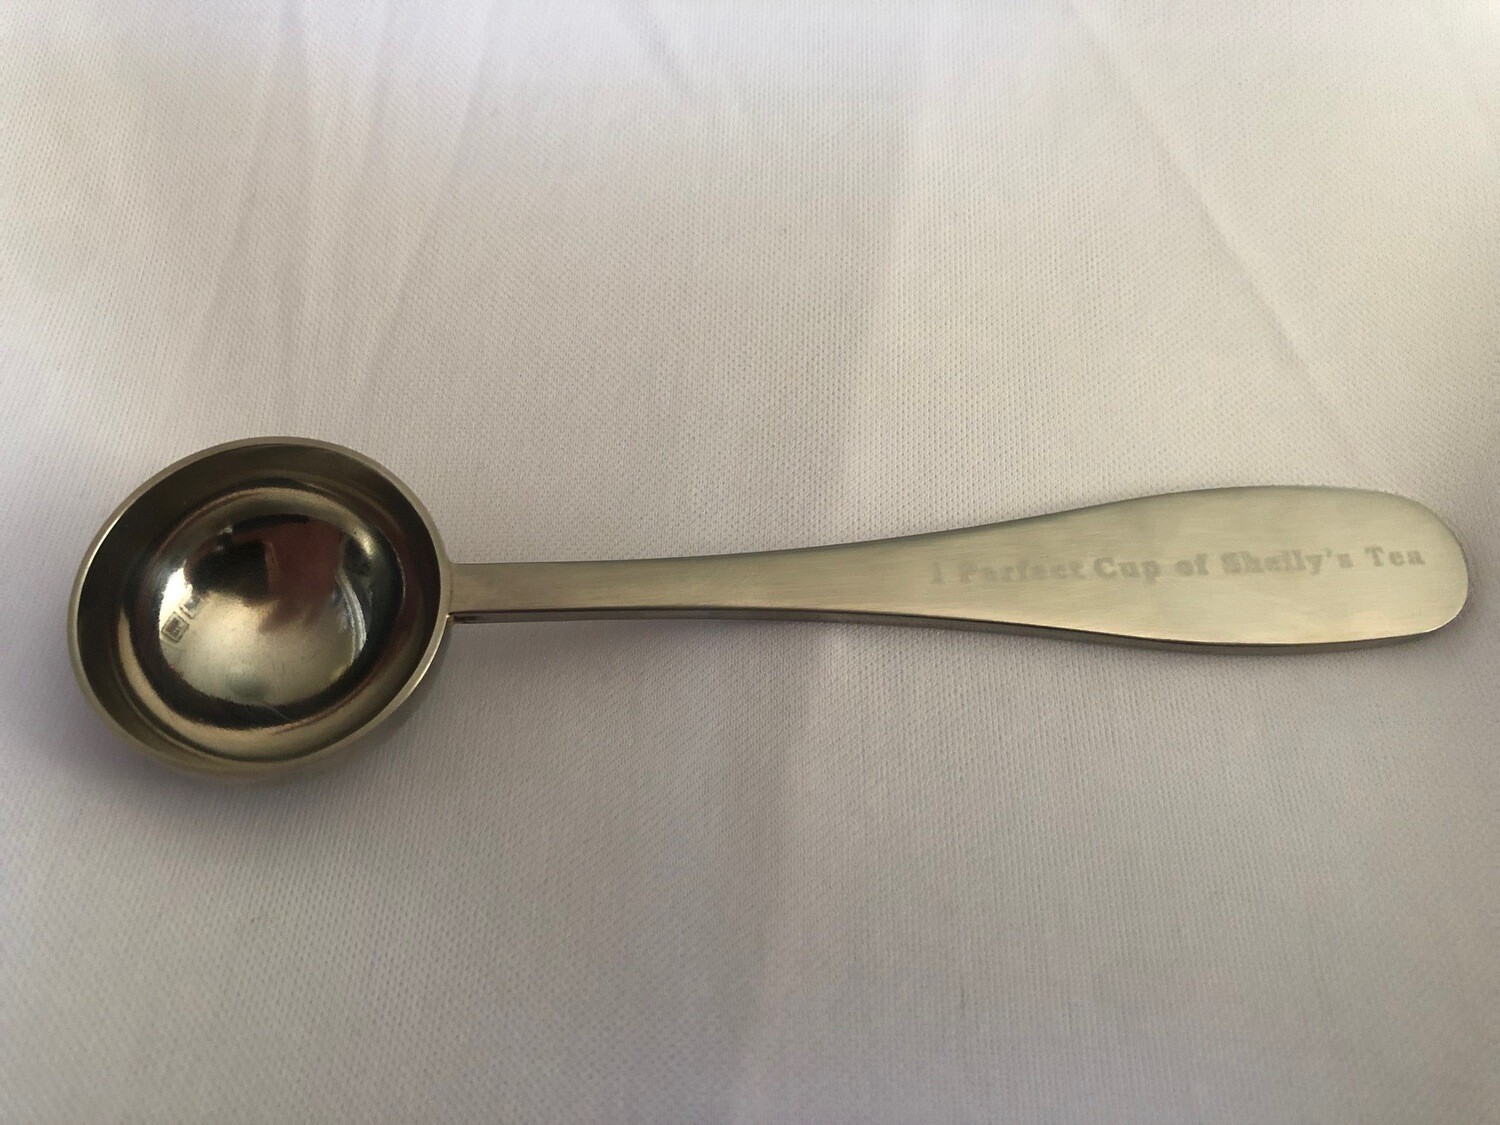 The Shelly’s measuring spoon!